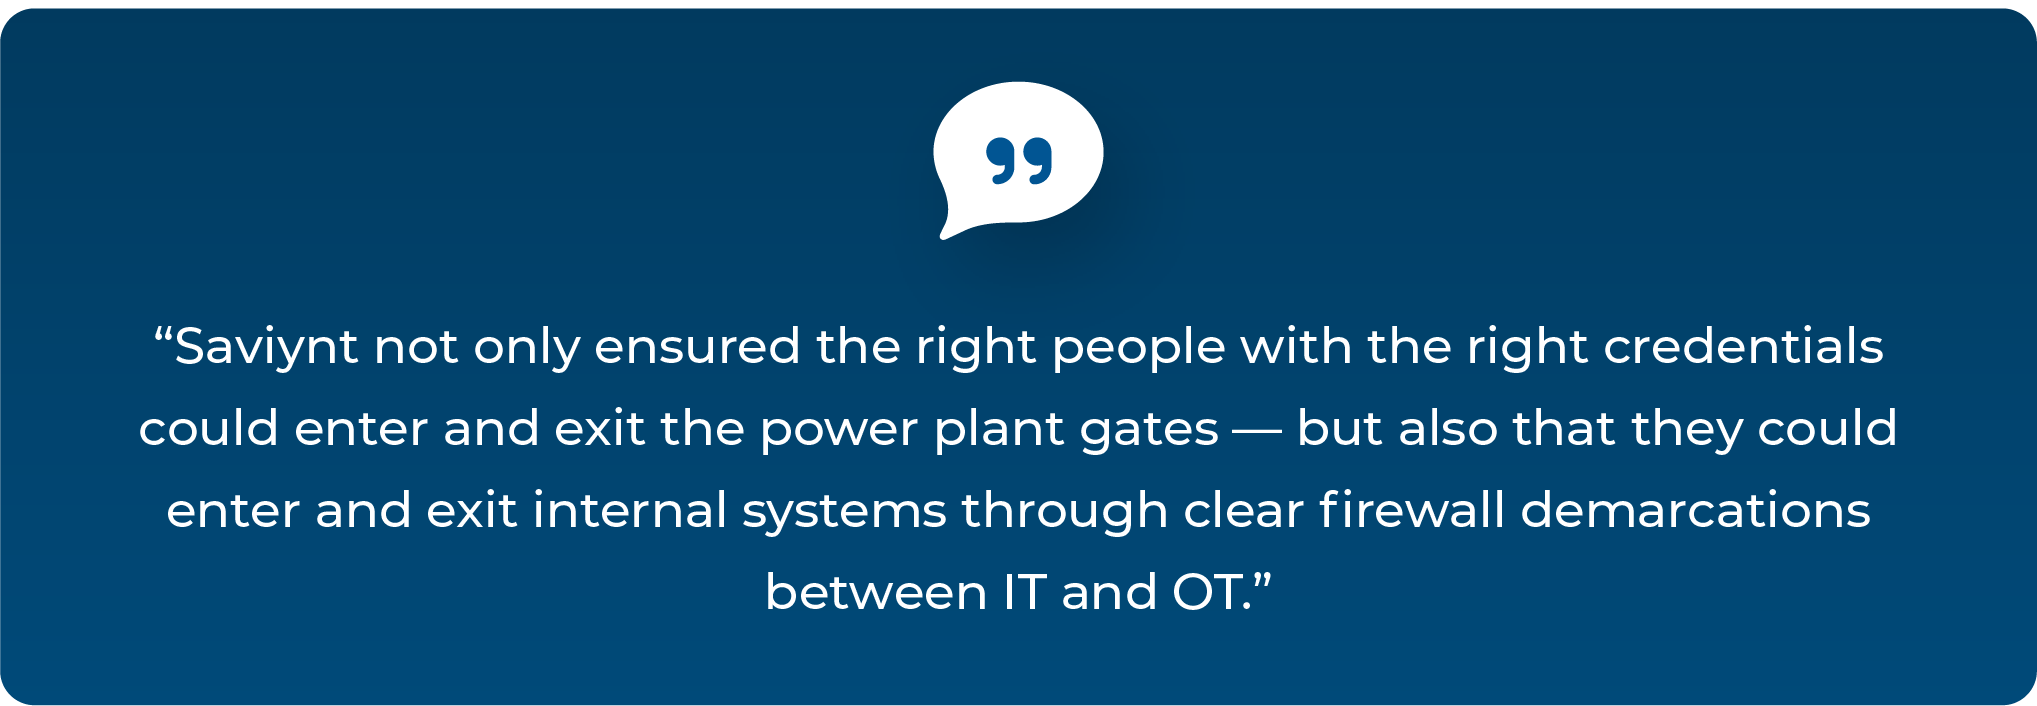 operational-technology-quote-2